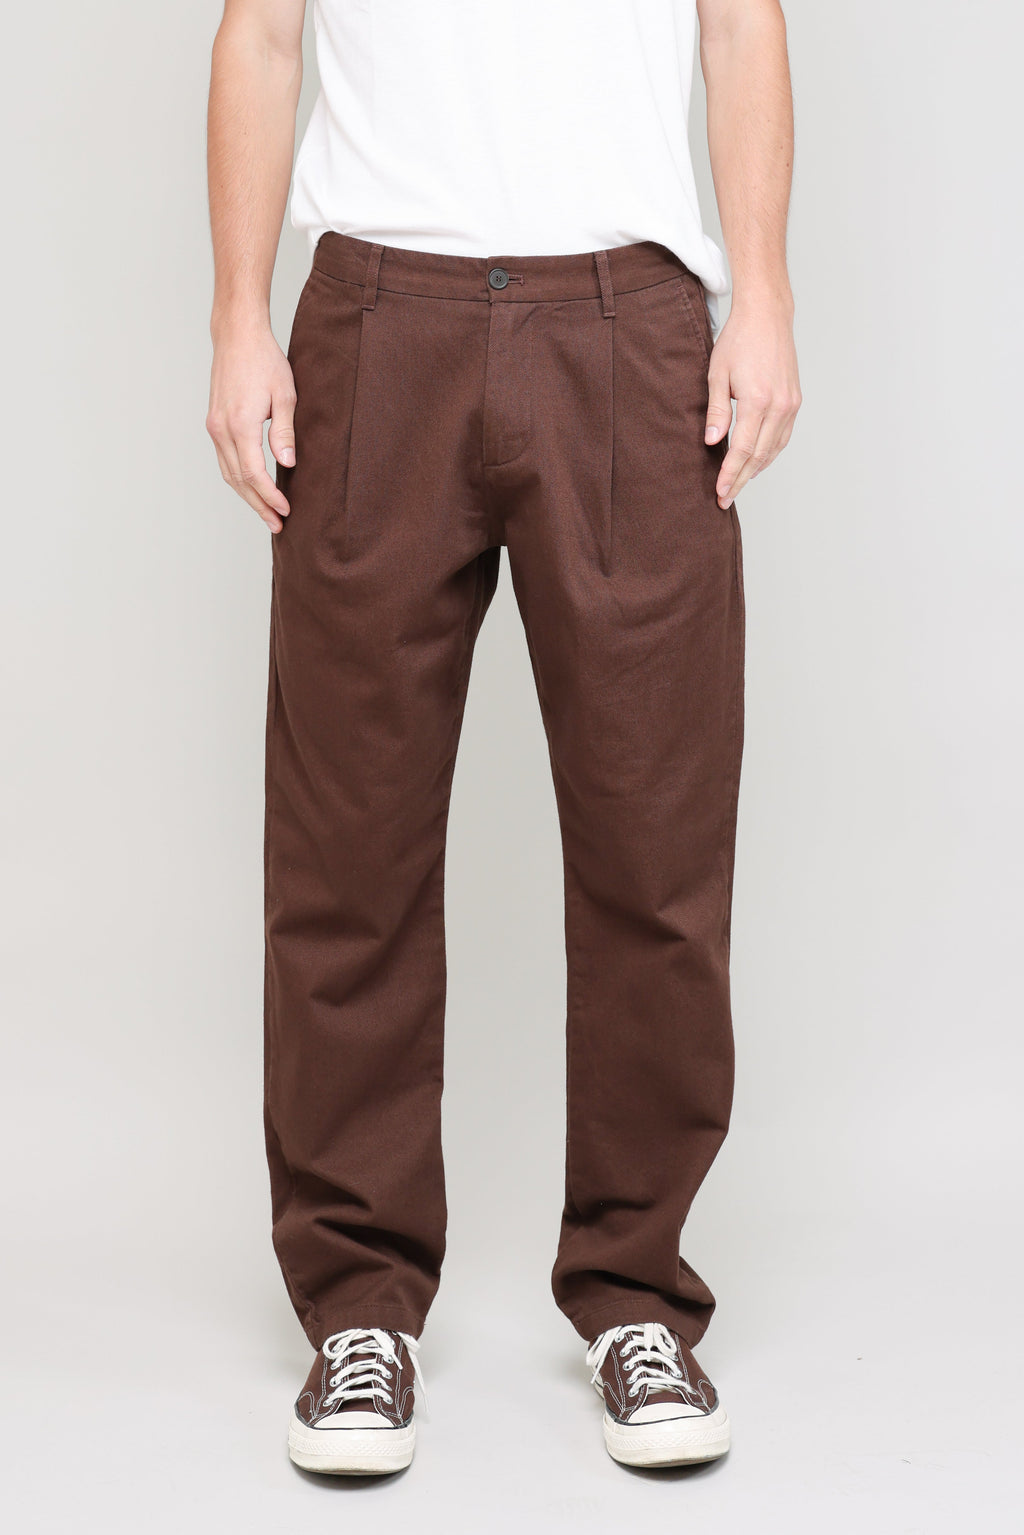 Pleated Chino Classic Tumbler Drill in Brown 01